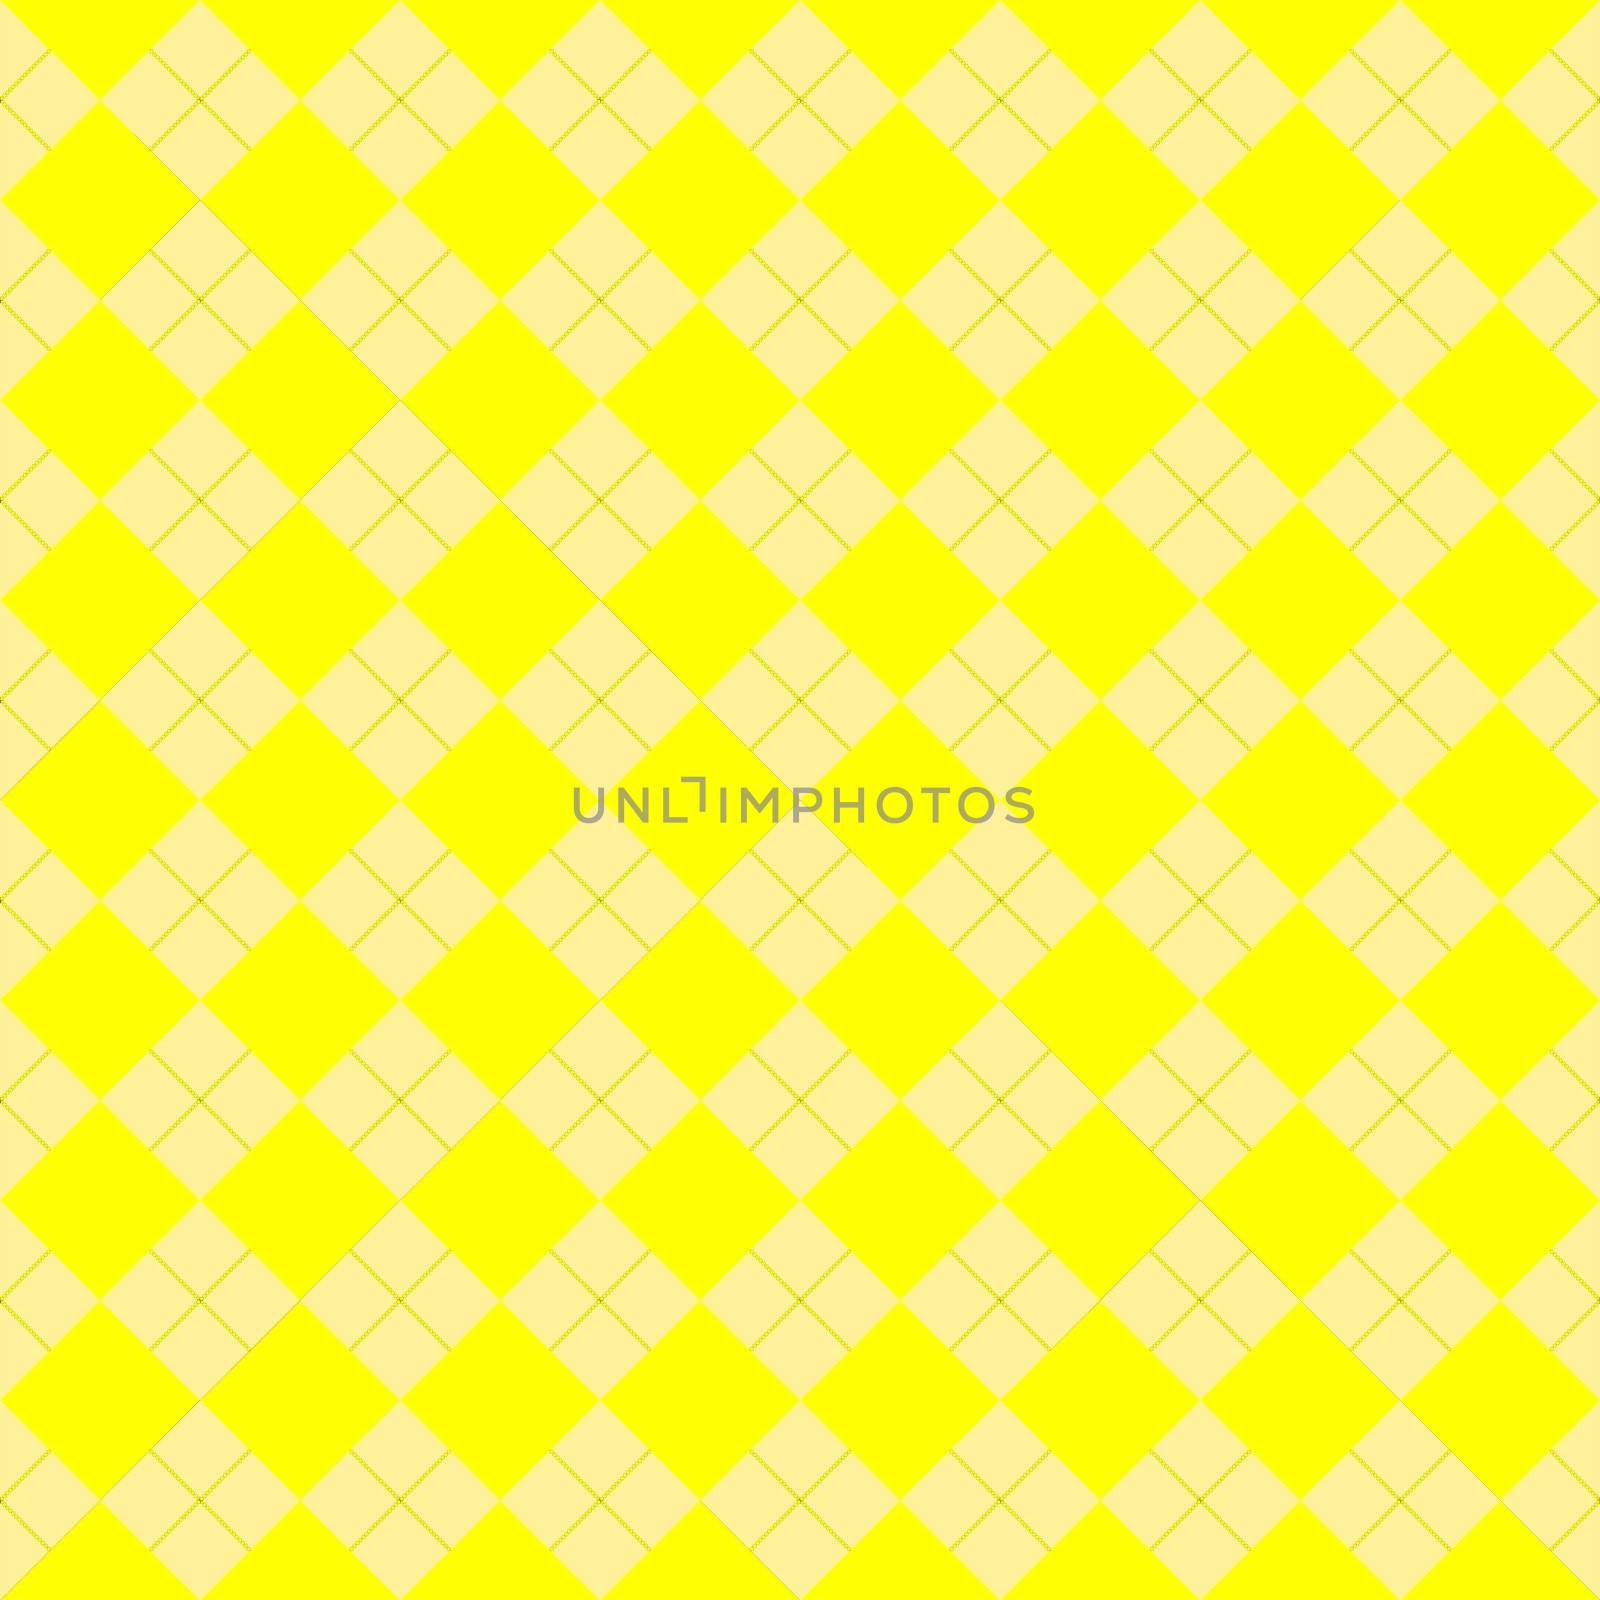 sweater texture yellow, vector art illustration; more textures in my gallery